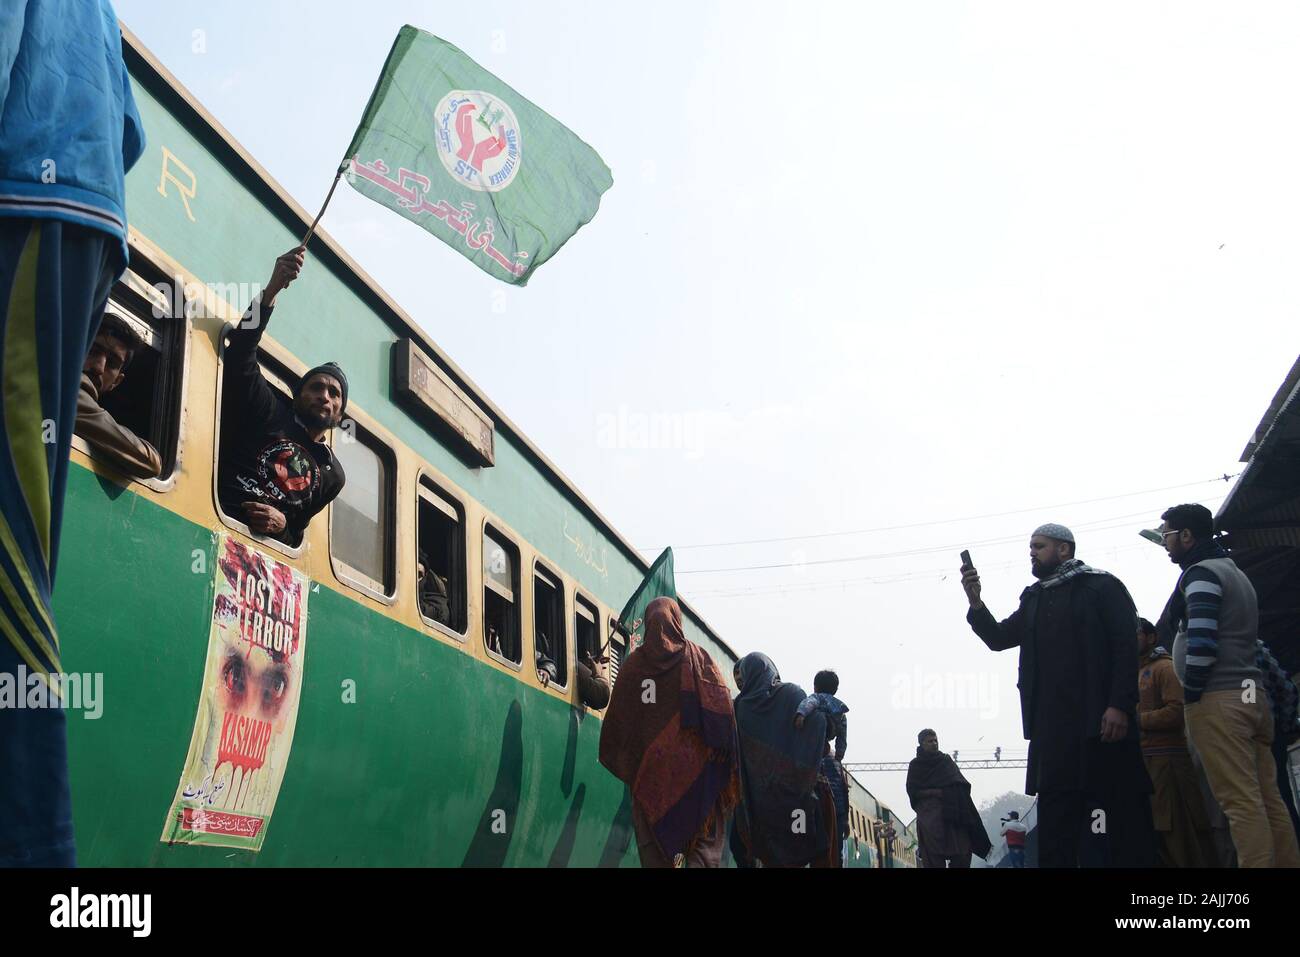 Activists of Pakistan Sunni Tahreek (PST) holding party flag while installed banner on train during their departure titled “Jalta Kashmir Bachao Train March” from Lahore to Karachi at Railway Station in provincial capital Lahore. Pakistan Sunni Tahreek (PST) titled “Jalta Kashmir Bachao Train March” from Lahore to Karachi express solidarity with the people of Indian occupied Kashmir (IOK) who have been living under curfew imposed by the Indian government on August 5, 2019.Central leader of Pakistan Sunni Tahreek (PST) Shahdab Raza Nakshbandi, Dr Shahid Hussain, Sharif-u-ddin Qaddafi, Sardar Ta Stock Photo